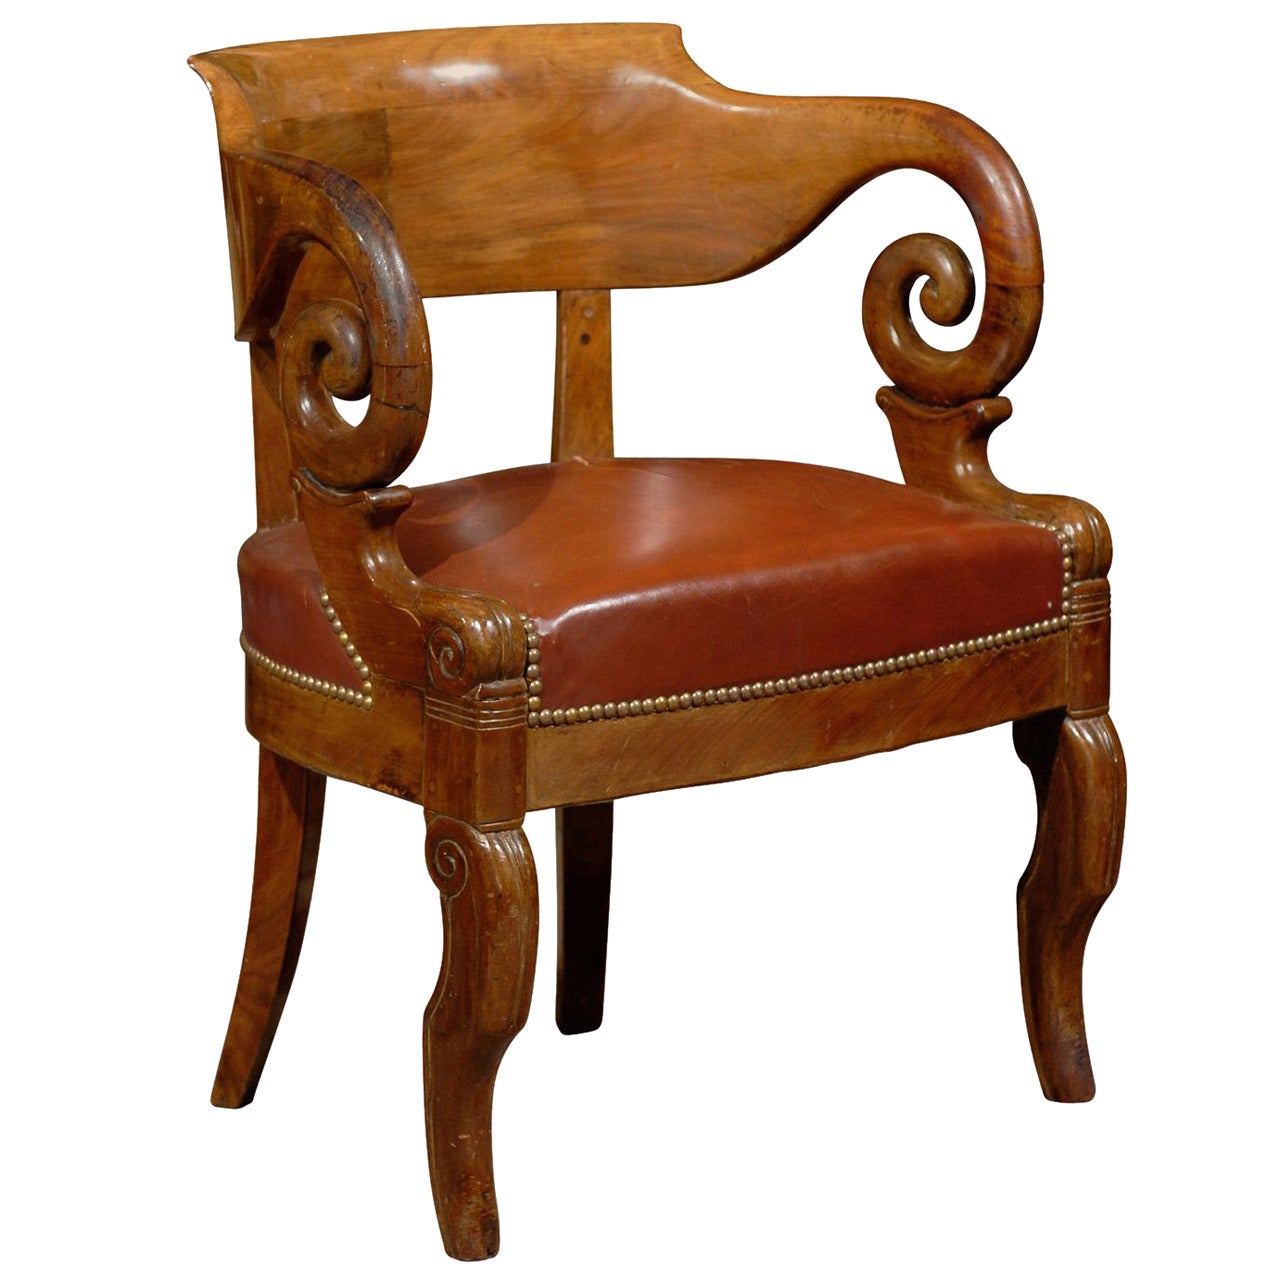 Early 19th Century French Restoration Period Walnut Desk Chair with Leather Seat